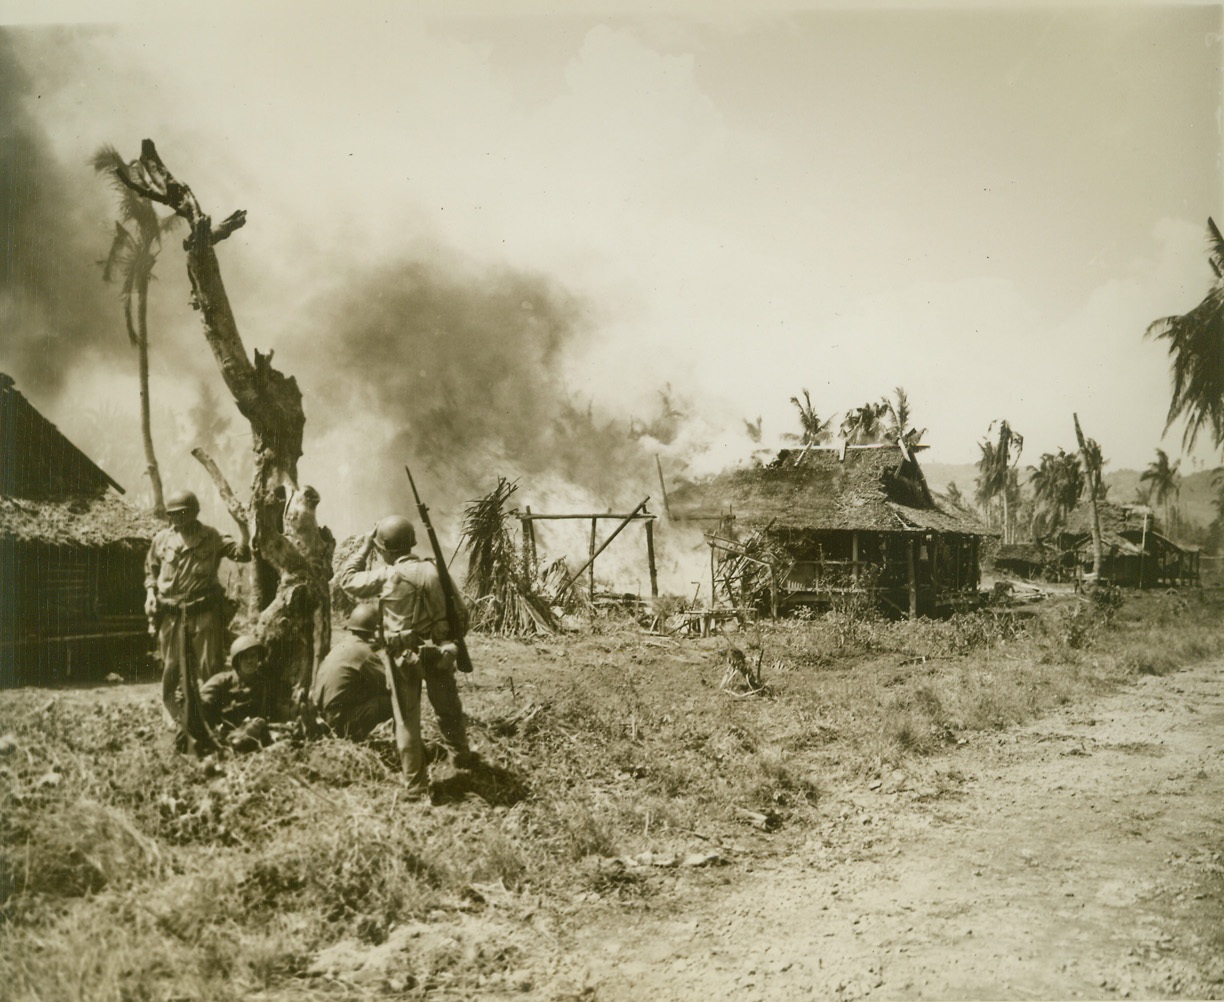 Jap Fire Razes Philippine Village, 11/1/1944. Leyte, Philippines—Infantrymen keep watch beside a gaunt, scarred tree in the flaming village of San Jose on Leyte. The tiny village caught fire as Japs sent their counter-fire toward invading Yank forces. Photo by ACME photographer Stanley Troutman for the war picture pool. Credit: ACME.;